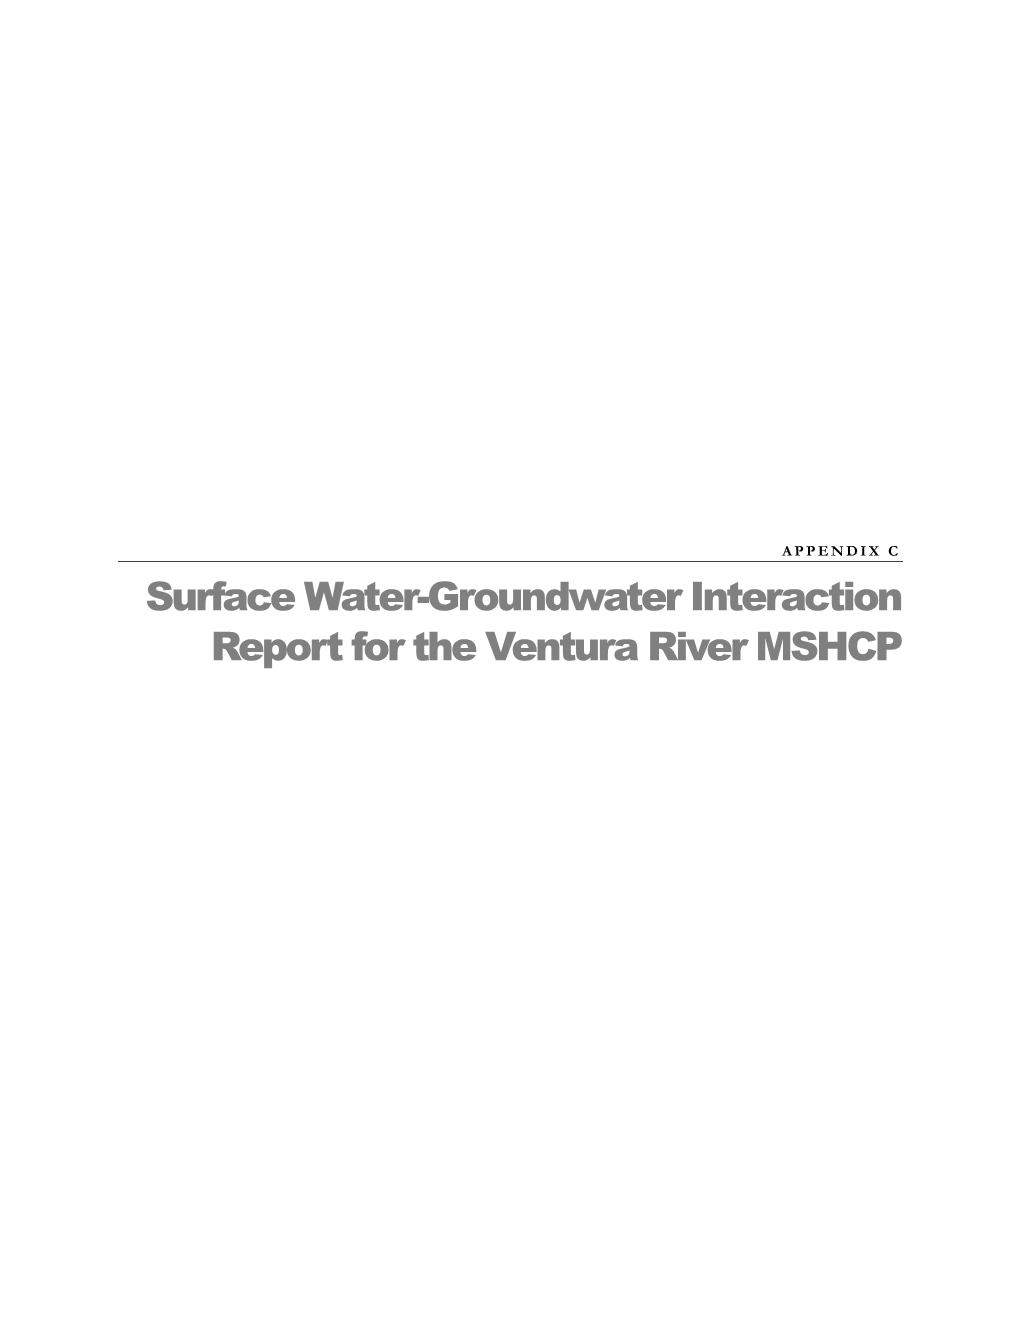 Surface Water-Groundwater Interaction Report for the Ventura River MSHCP